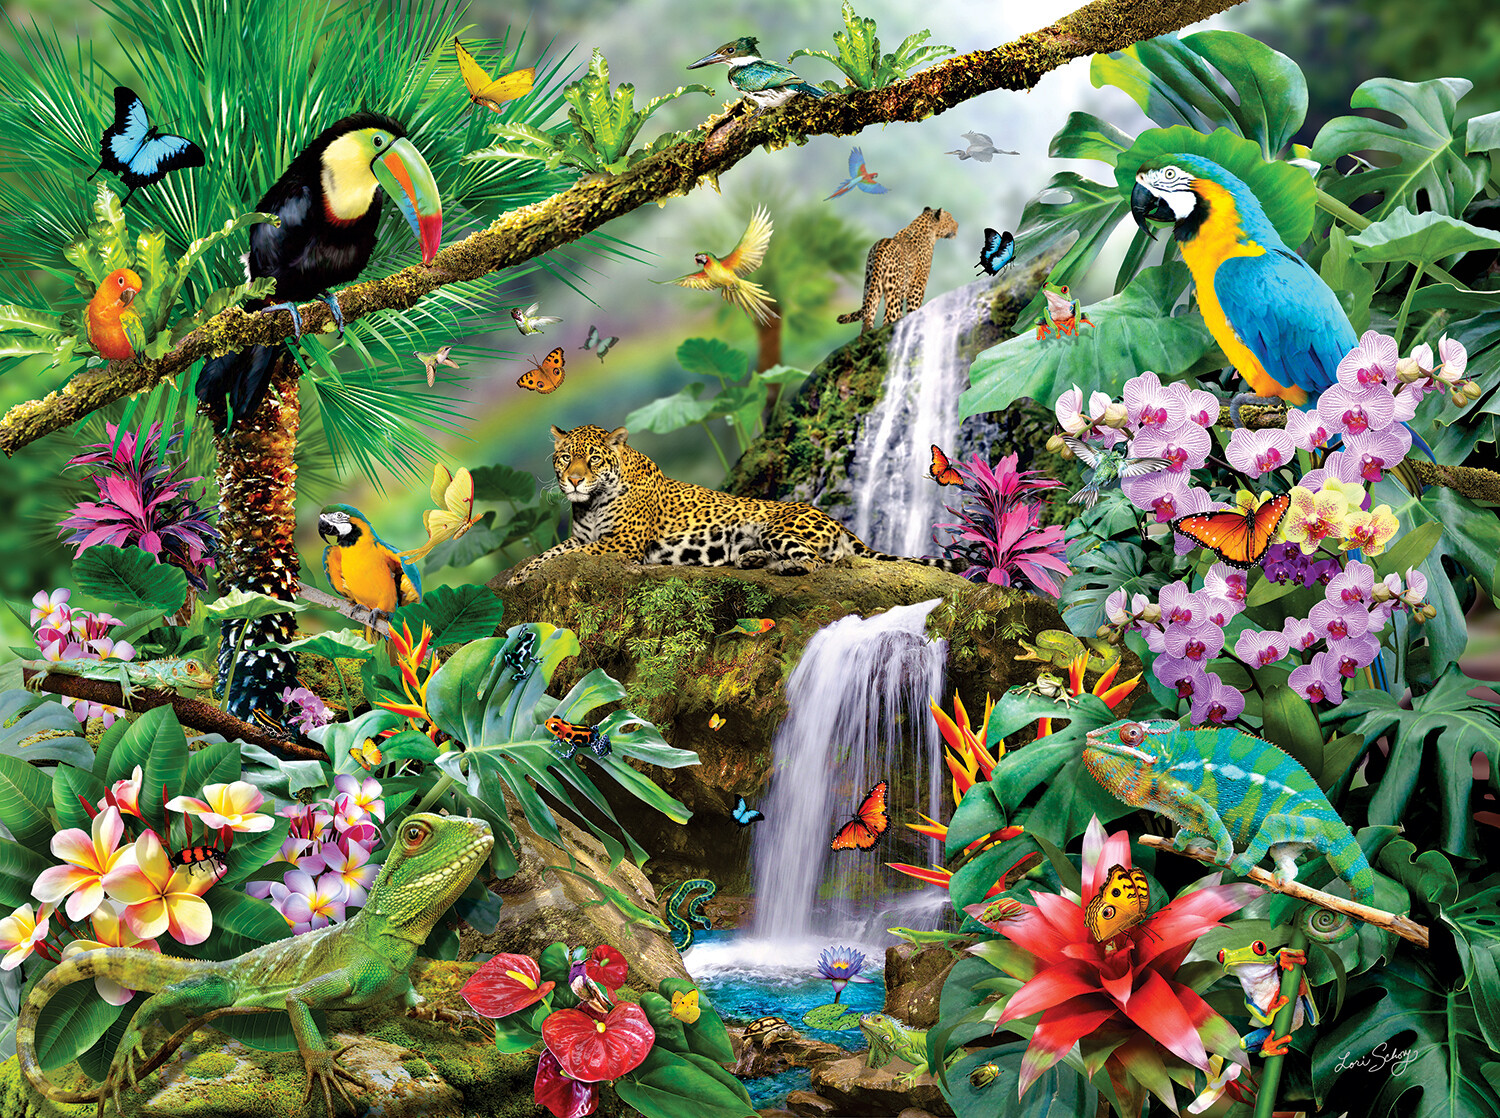 Tropical Holiday Puzzle - 1000 piece